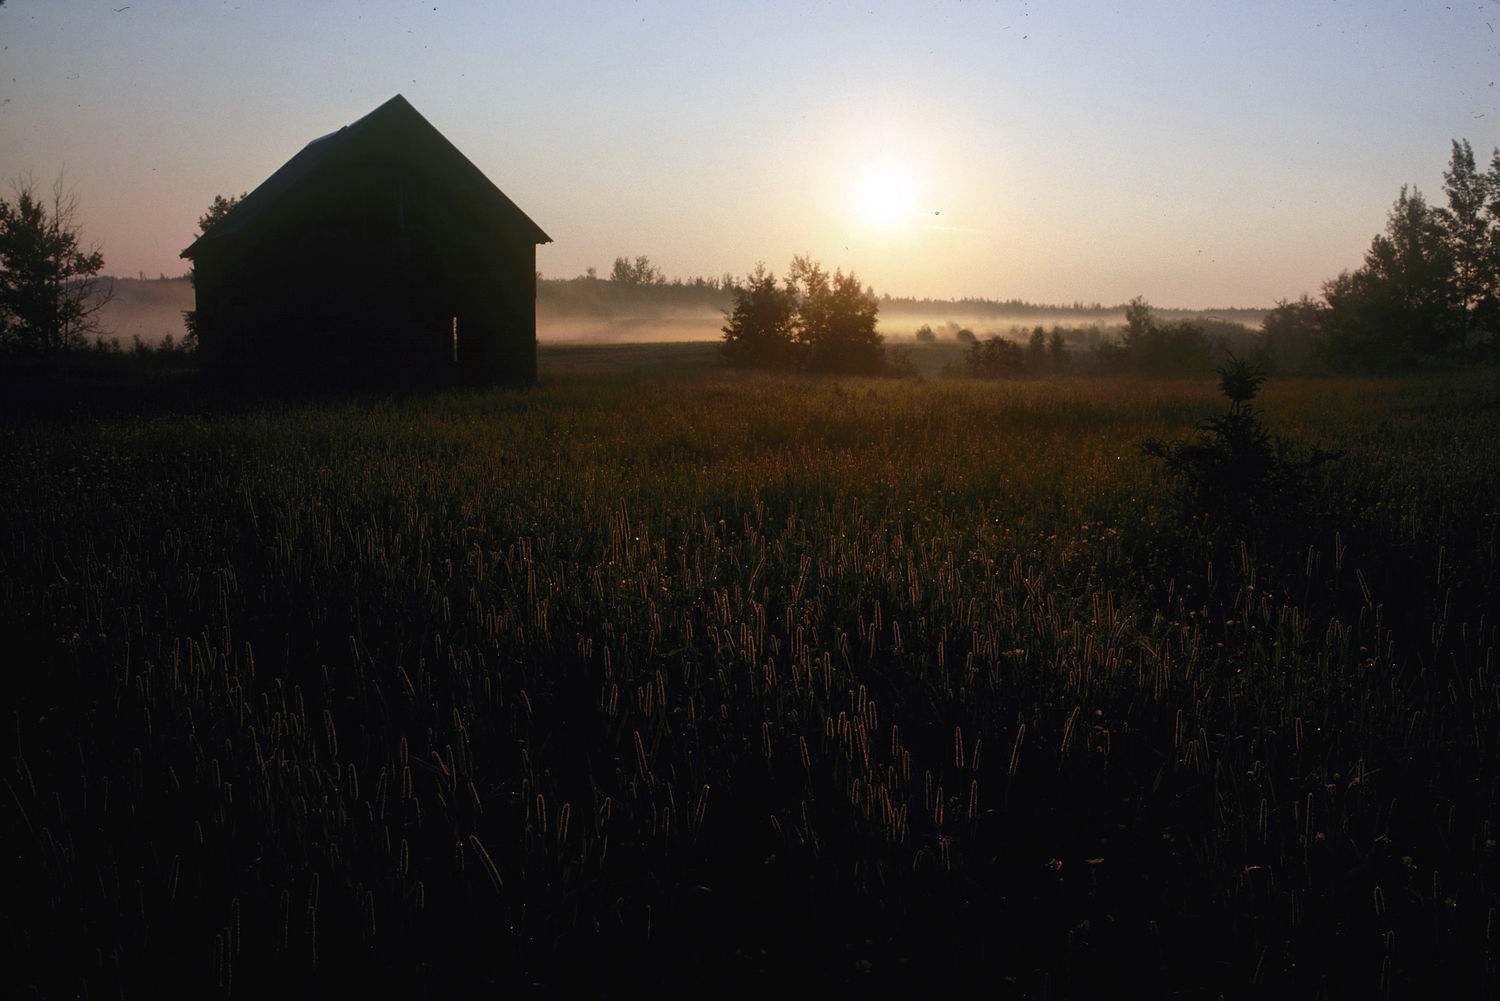 Outside view of a rural landscape, at dawn, on a field and building dimly lit. A light mist rises.